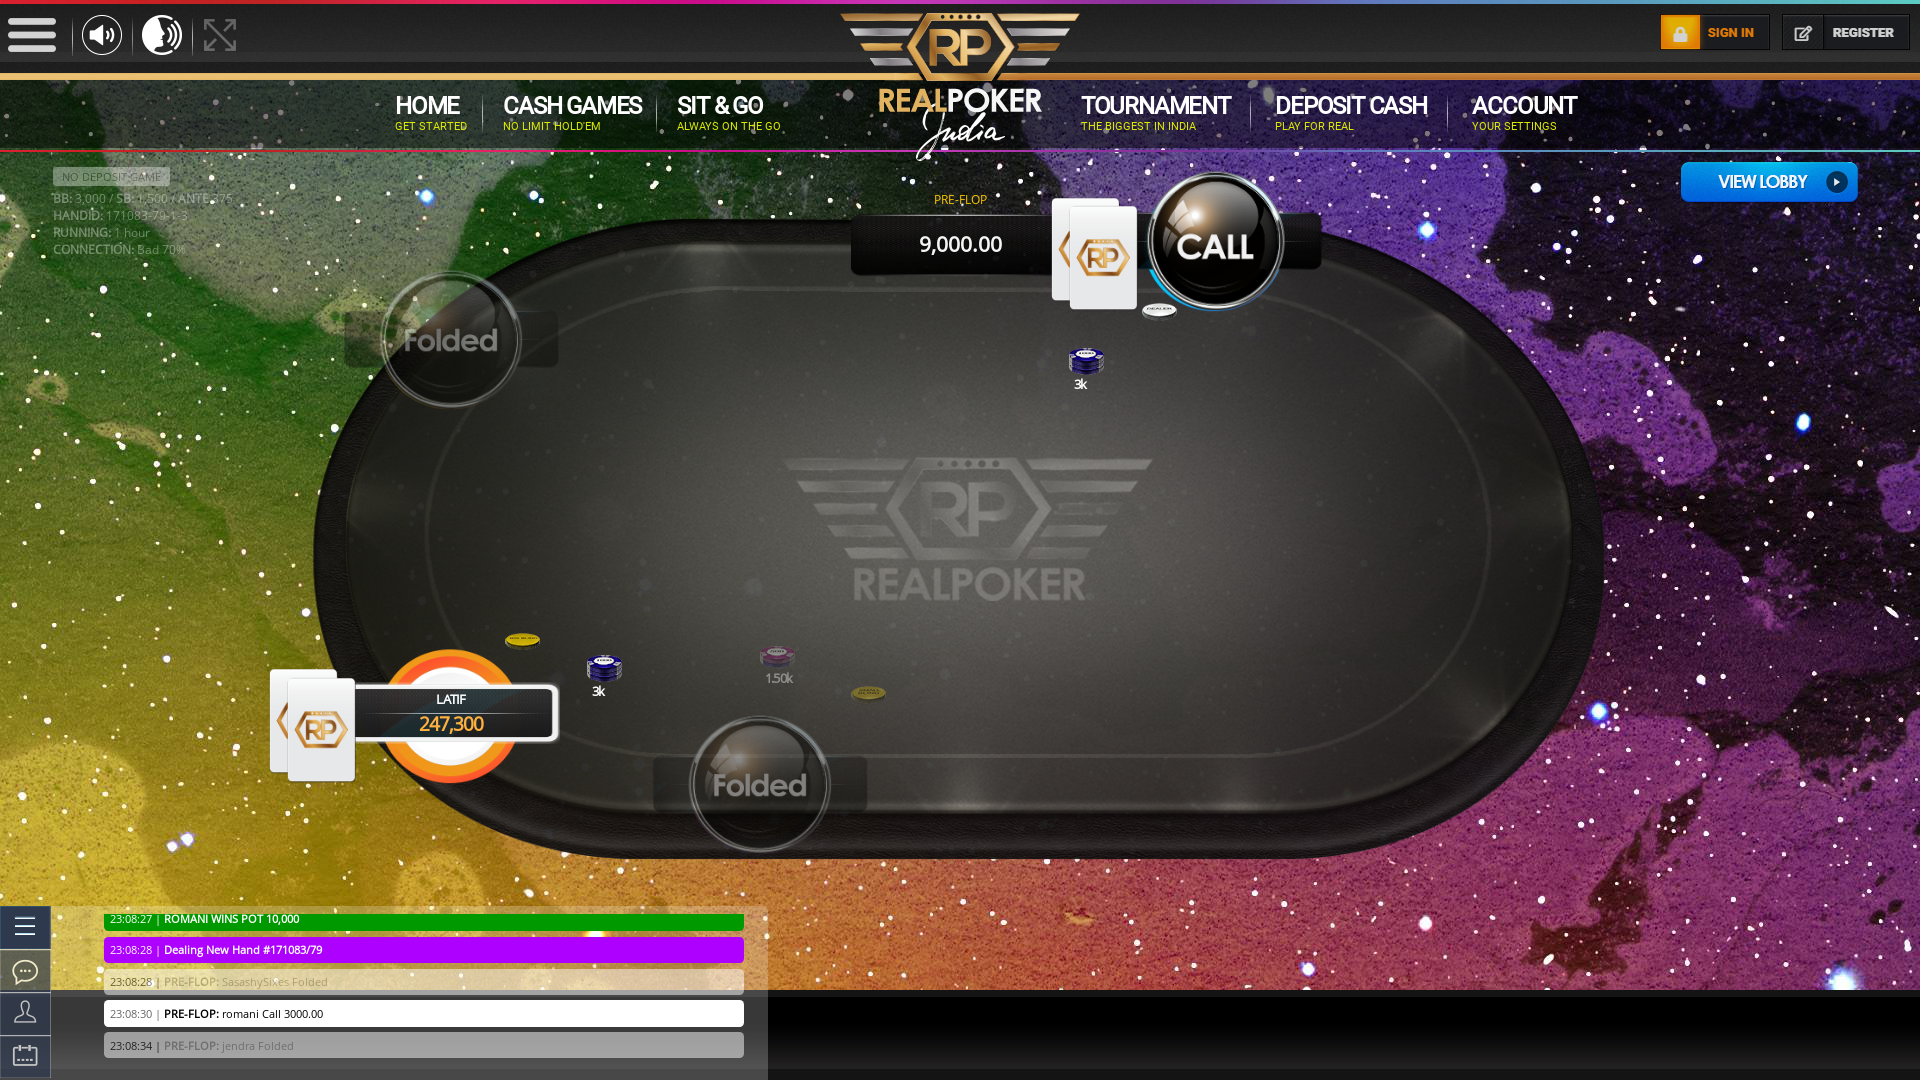 Online poker on a 10 player table in the 68th minute match up